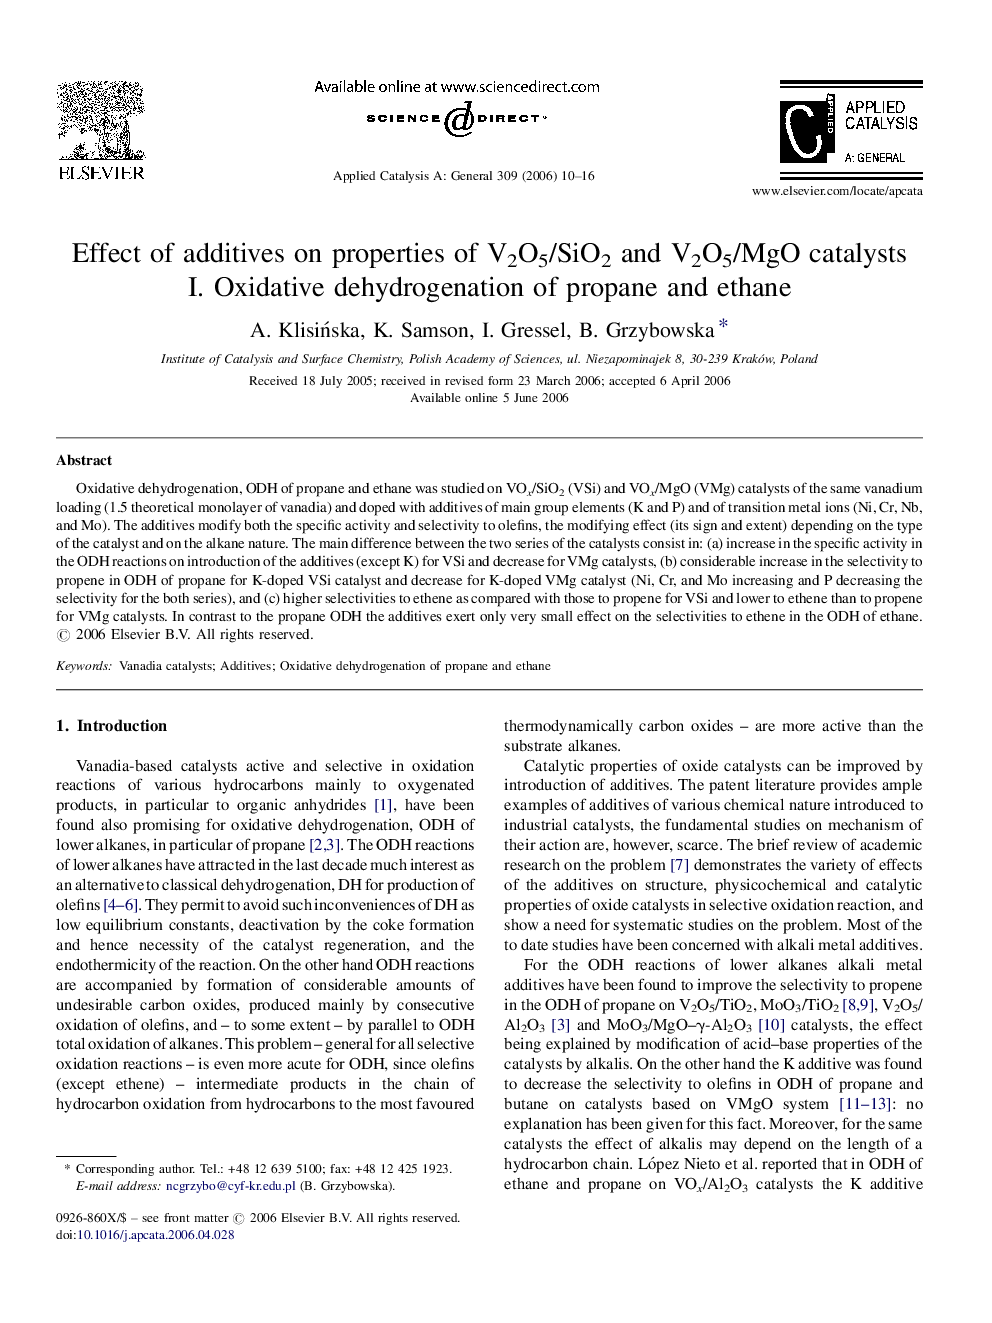 Effect of additives on properties of V2O5/SiO2 and V2O5/MgO catalysts: I. Oxidative dehydrogenation of propane and ethane